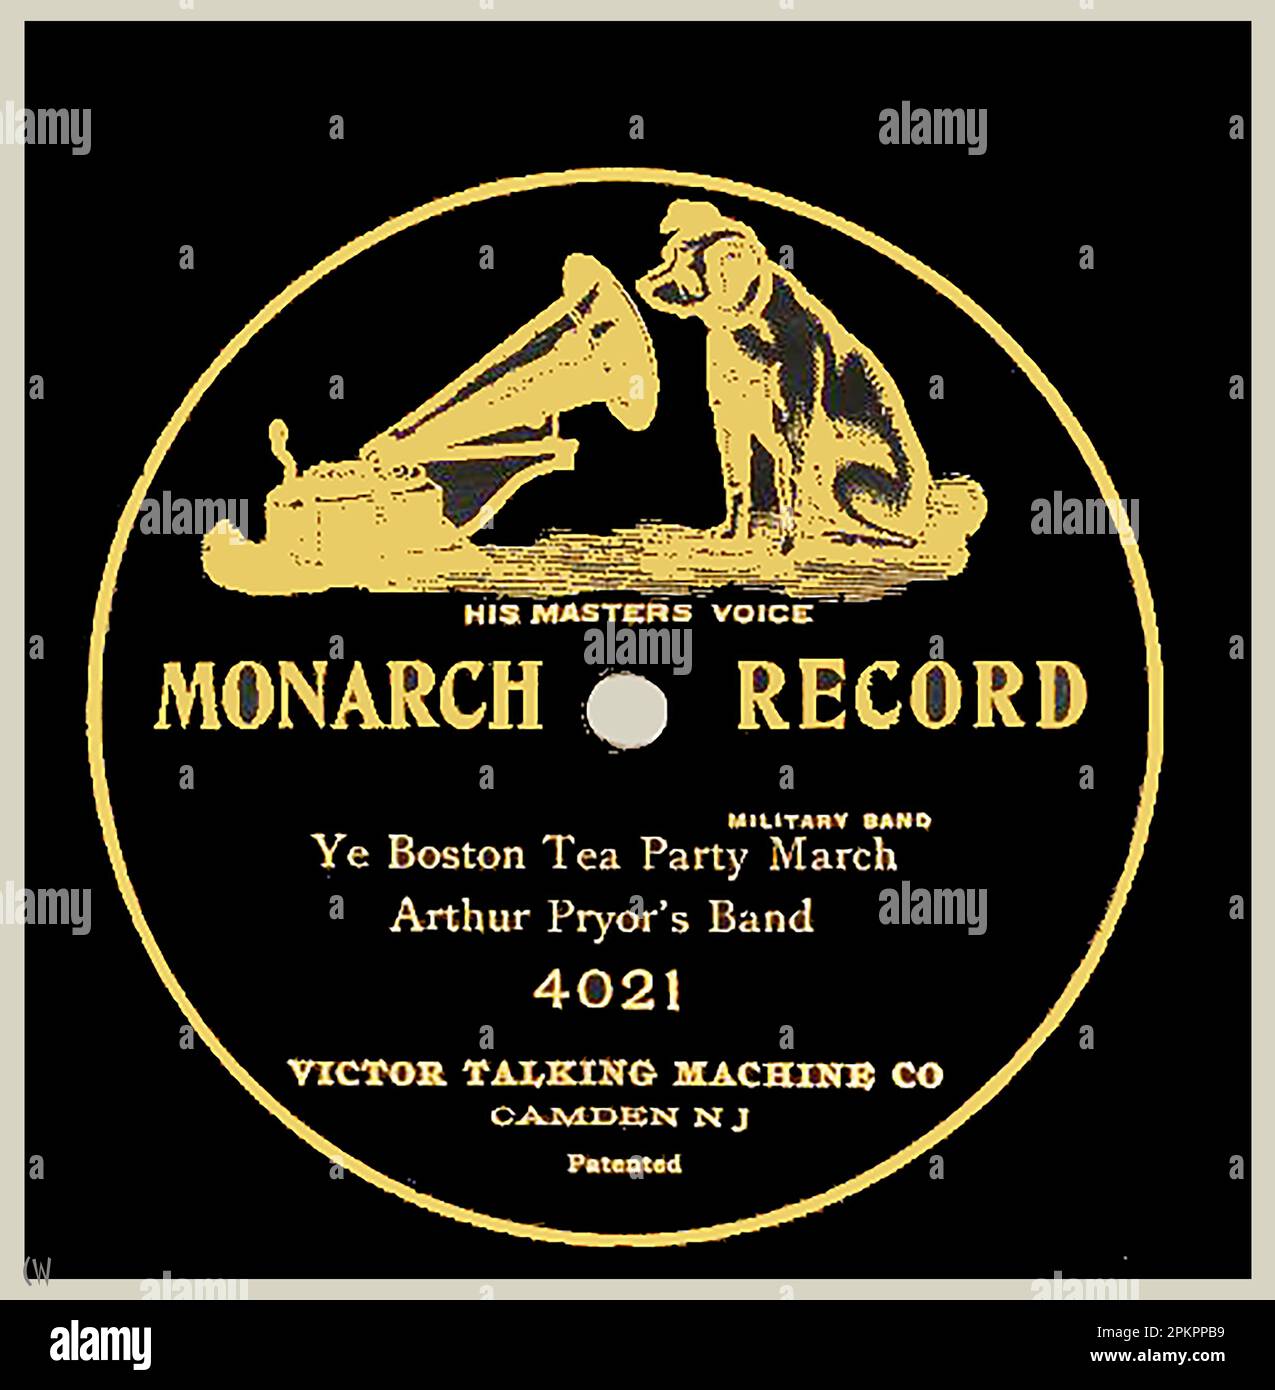 BOSTON TEA PARTY December 16, 1773 - A MONARCH RECORD ( HMV )   'Ye Boston Tea Party March' . The Boston Tea Party  was  an American political and mercantile protest against the Tea Act of  1773 which imposed a tea tax { Townshend Revenue Act)) but allowed the British East India Company tax  concessions for  its imported tea from China. A protest group known as the Sons of Liberty  (some disguised as  Indian tribesmen) destroyed an East India Company. cargo of tea by throwing tea chests from a number of ships into Boston Harbour.. The incident was the precursor  to the  American Revolution Stock Photo